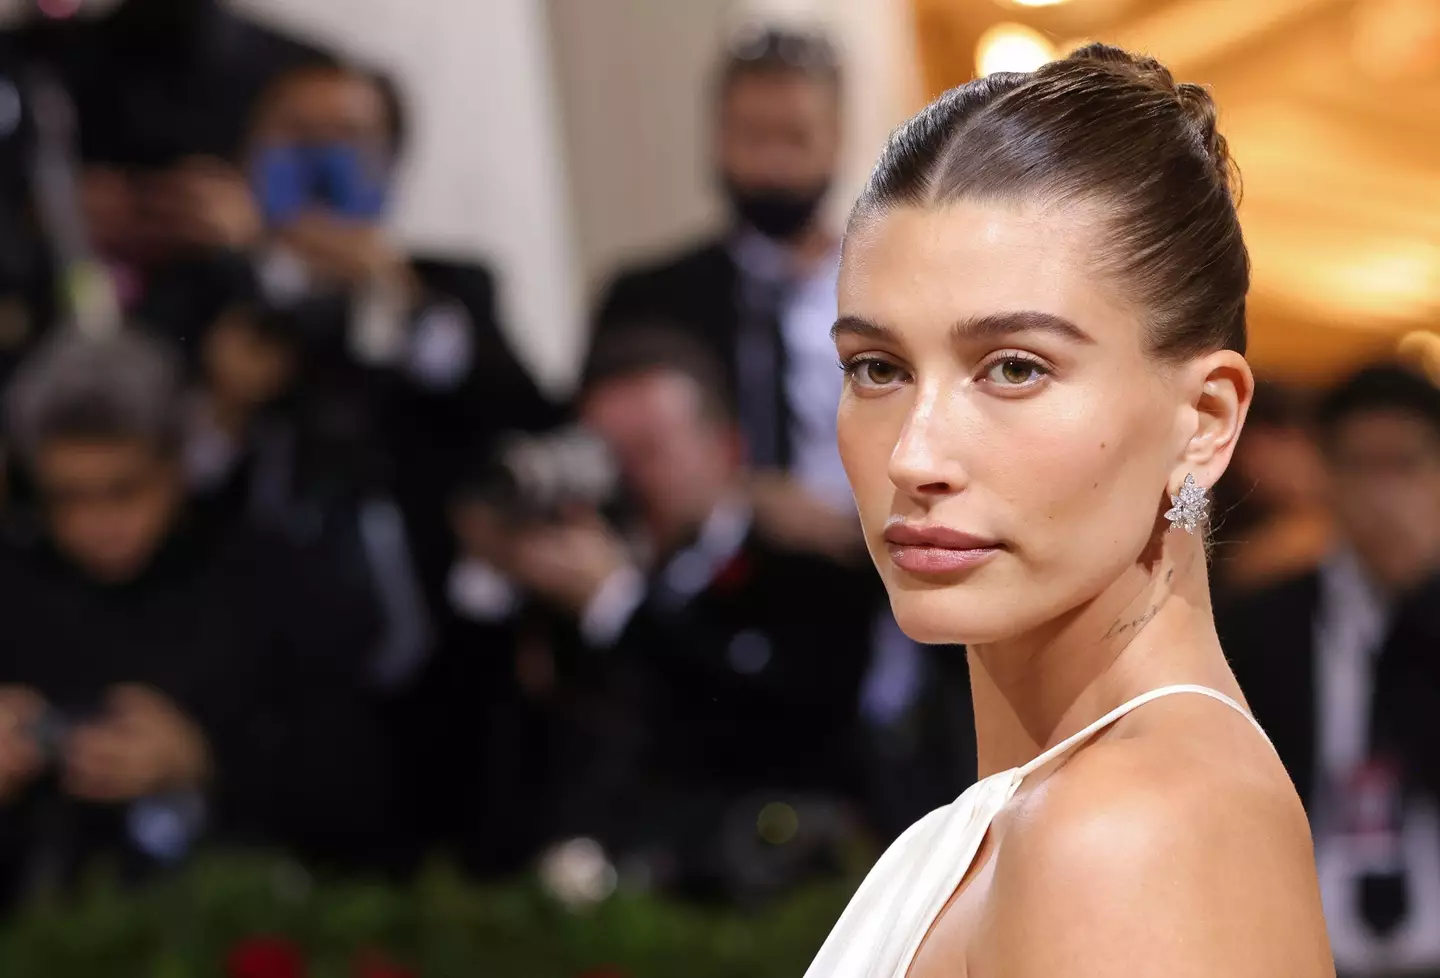 Hailey explained she's developed a 'certain numbness' to the hateful comments.